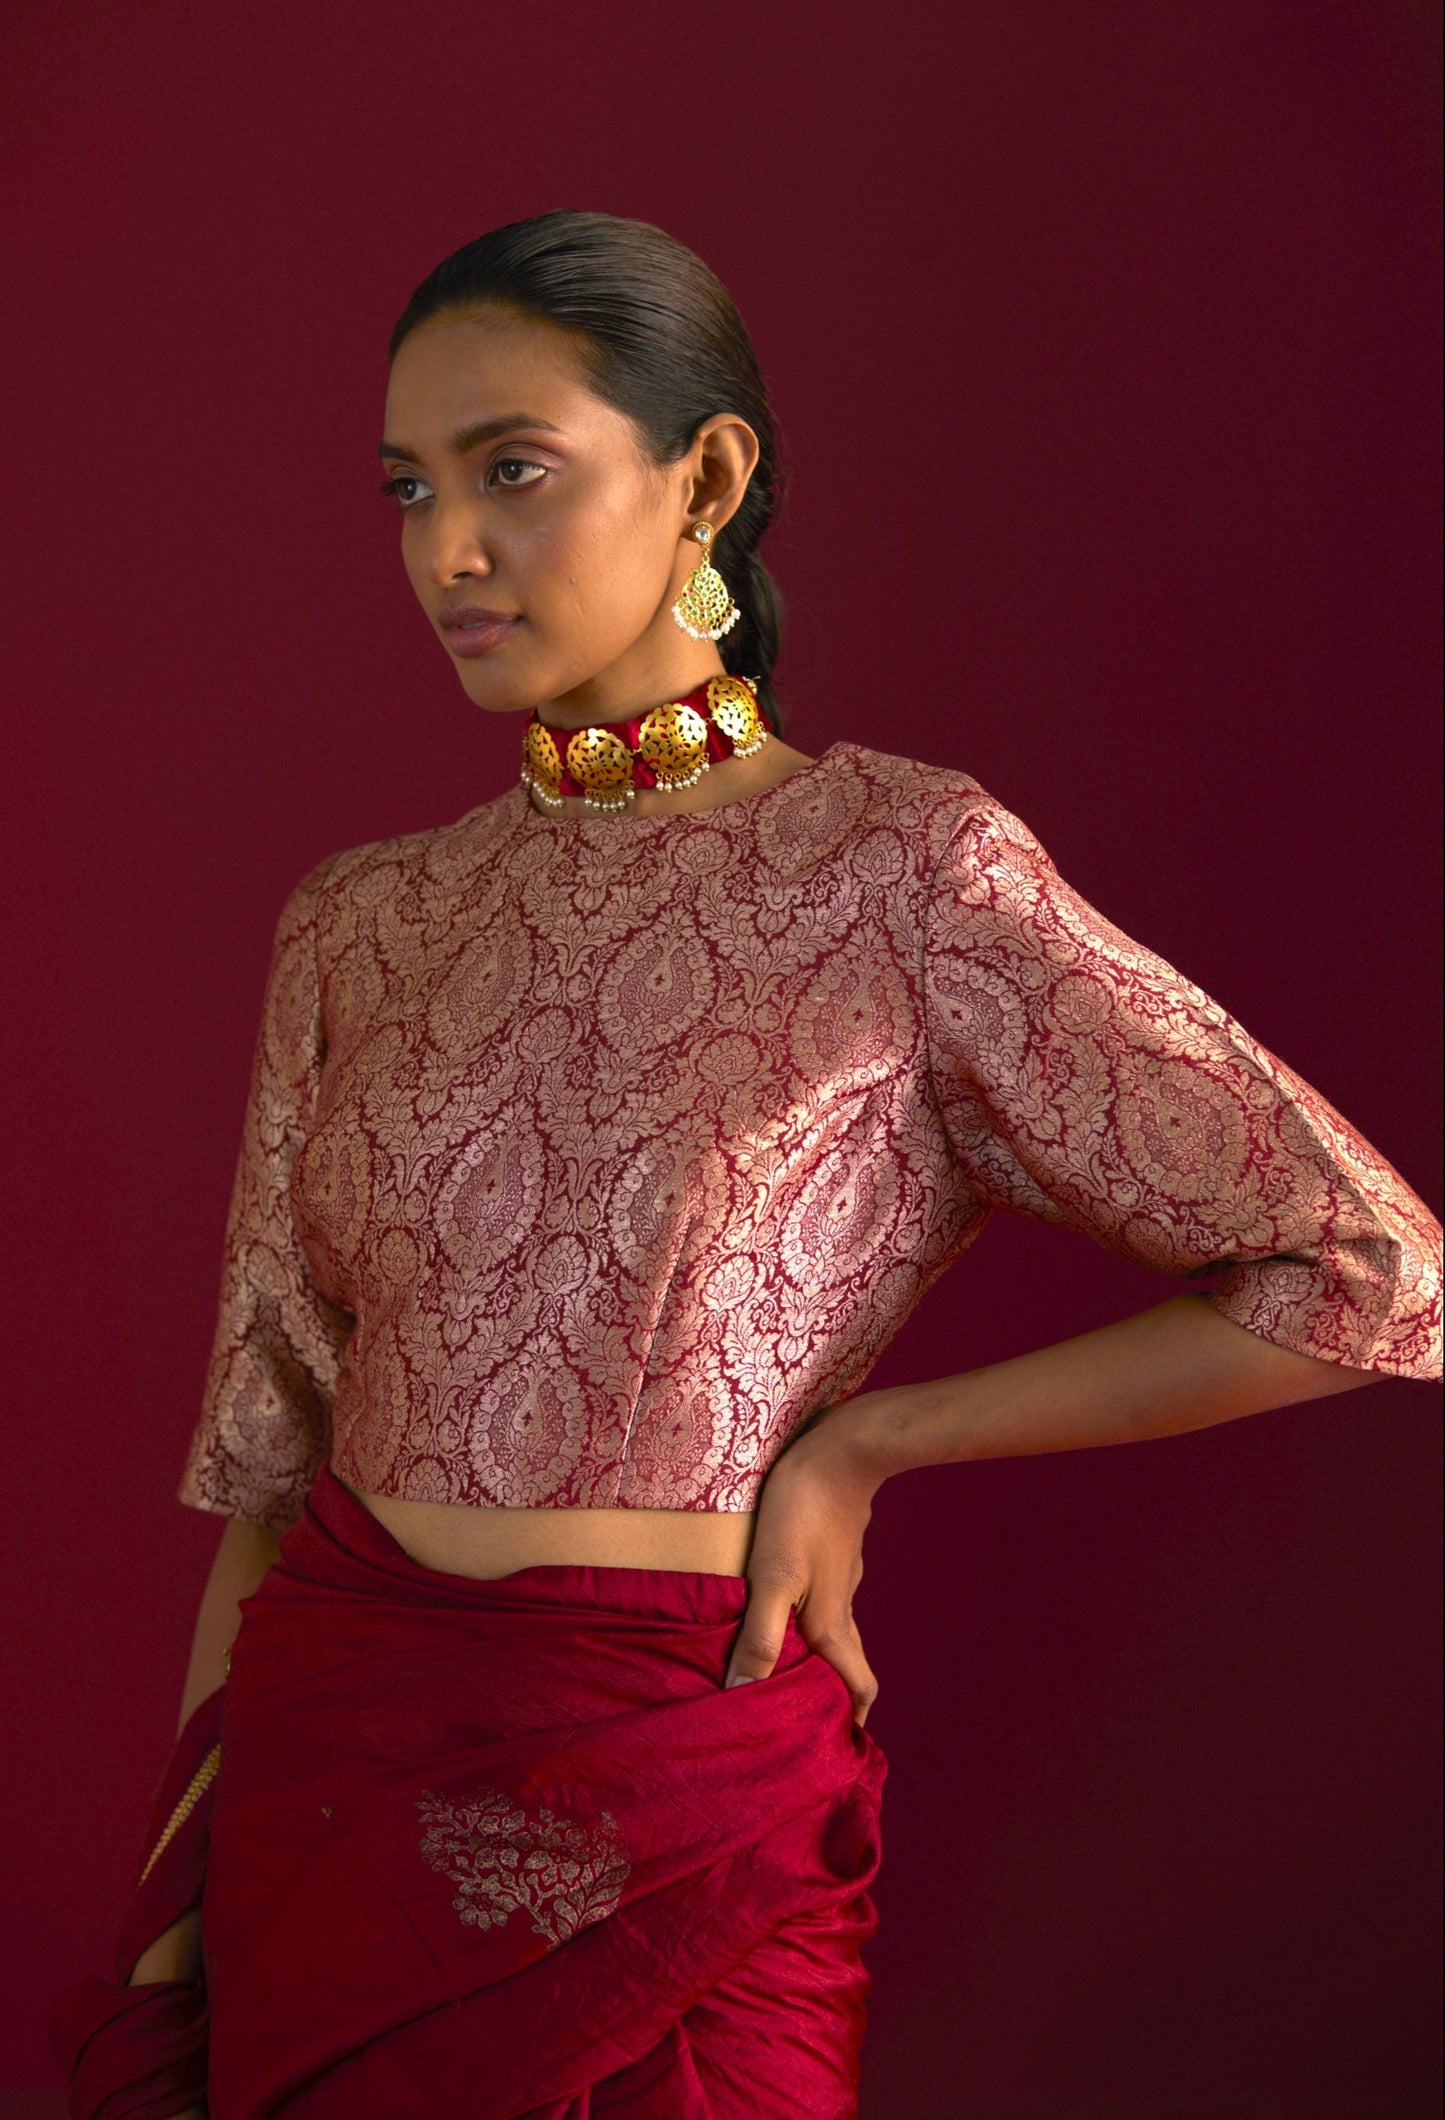 Zero Neck Blouse in Red Mughal Brocade